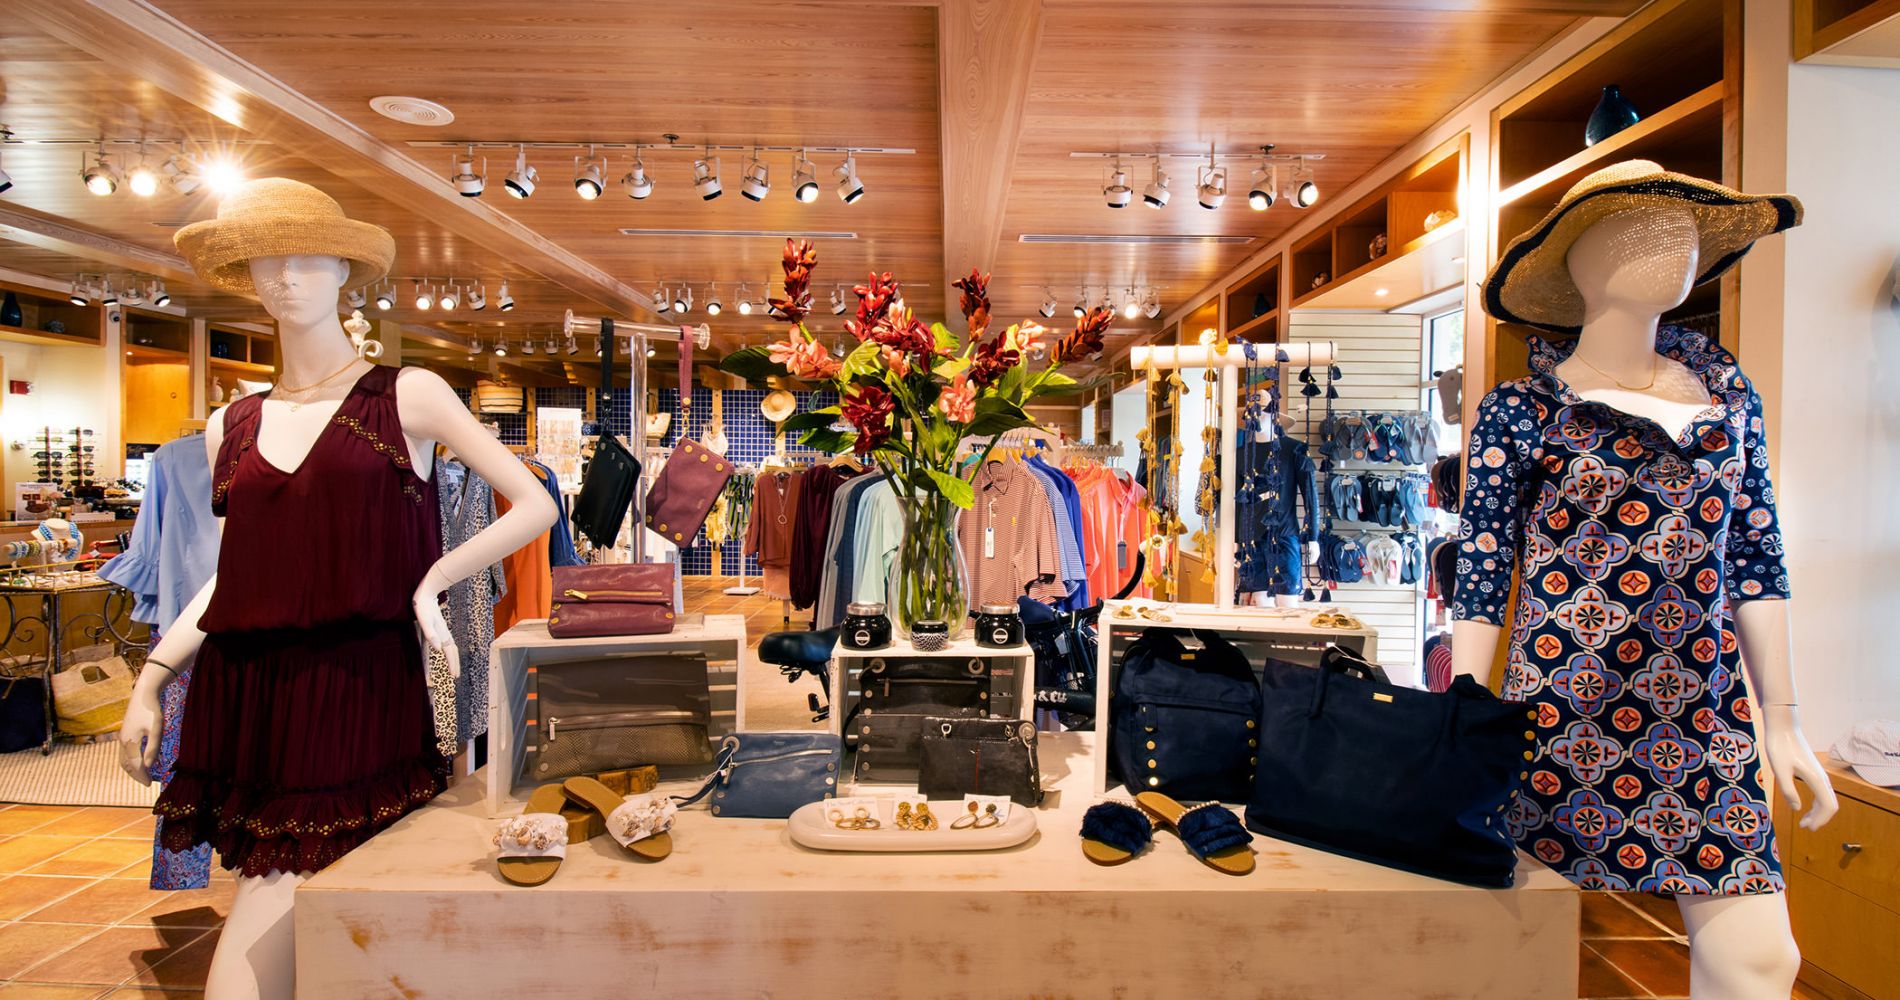 Front display of women's clothing and apparel at the women's shop